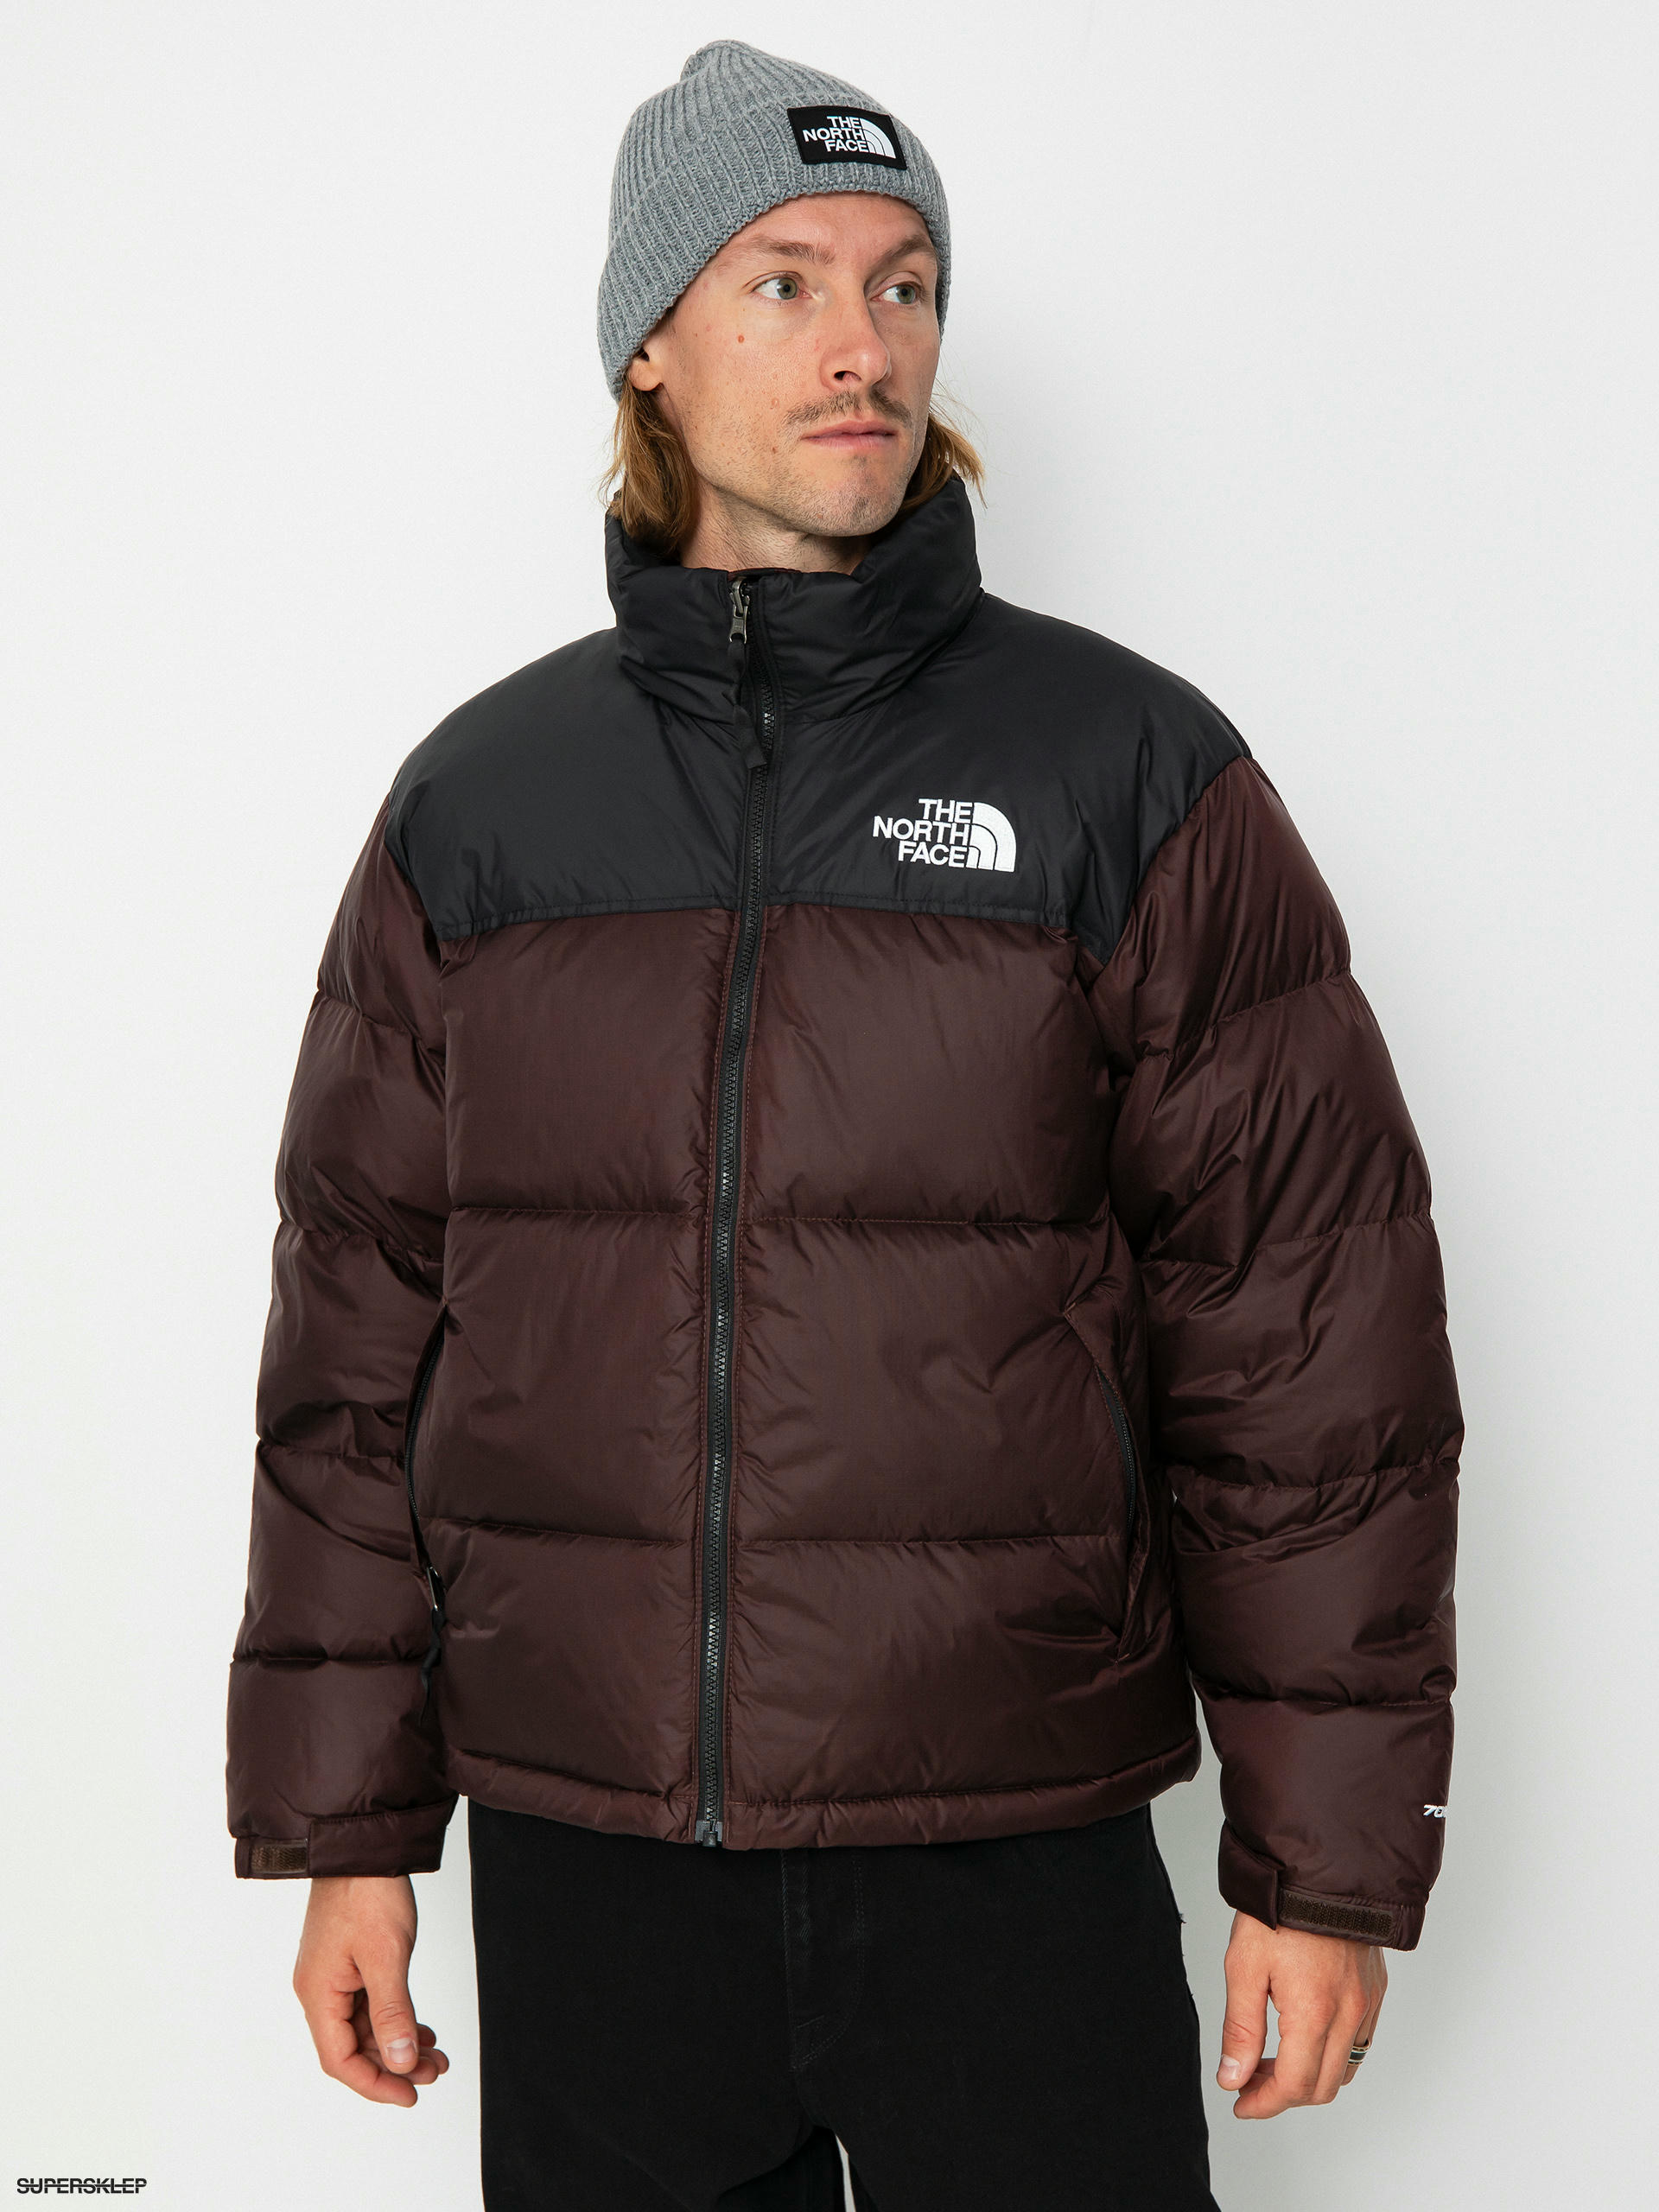 THE NORTH FACE - バッグ